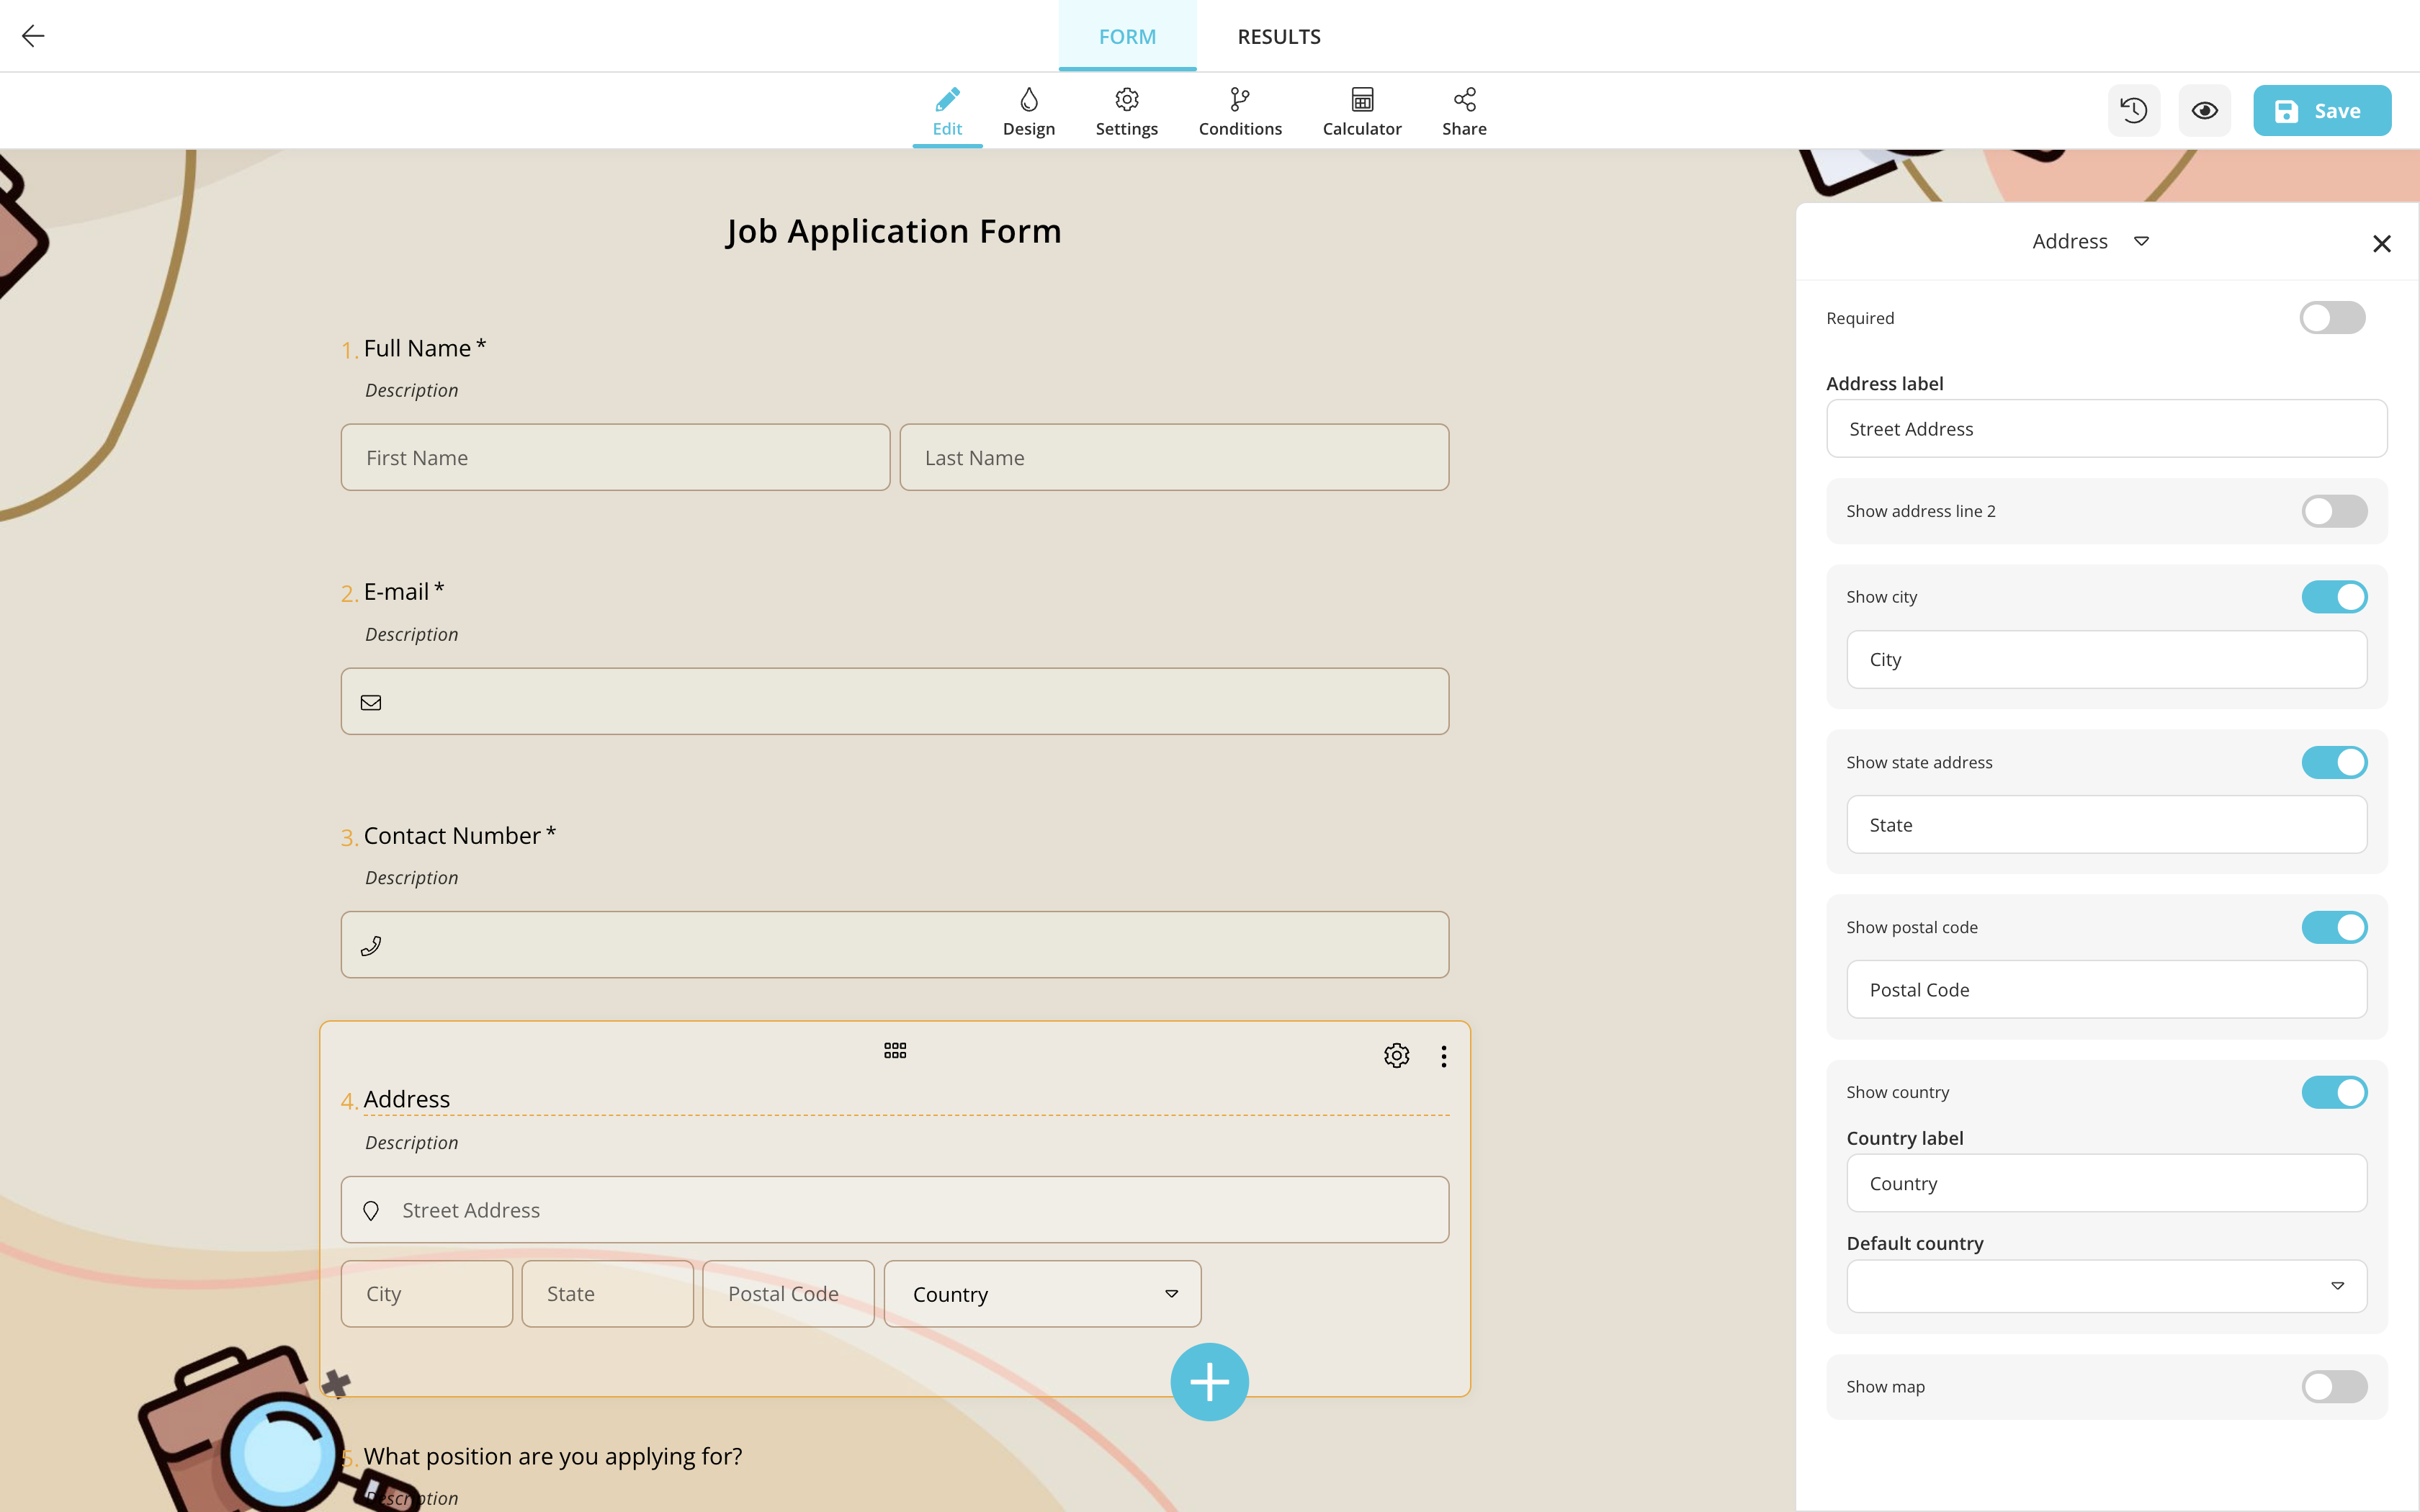 Build your forms with an intuitive form builder interface fastly and quickly.